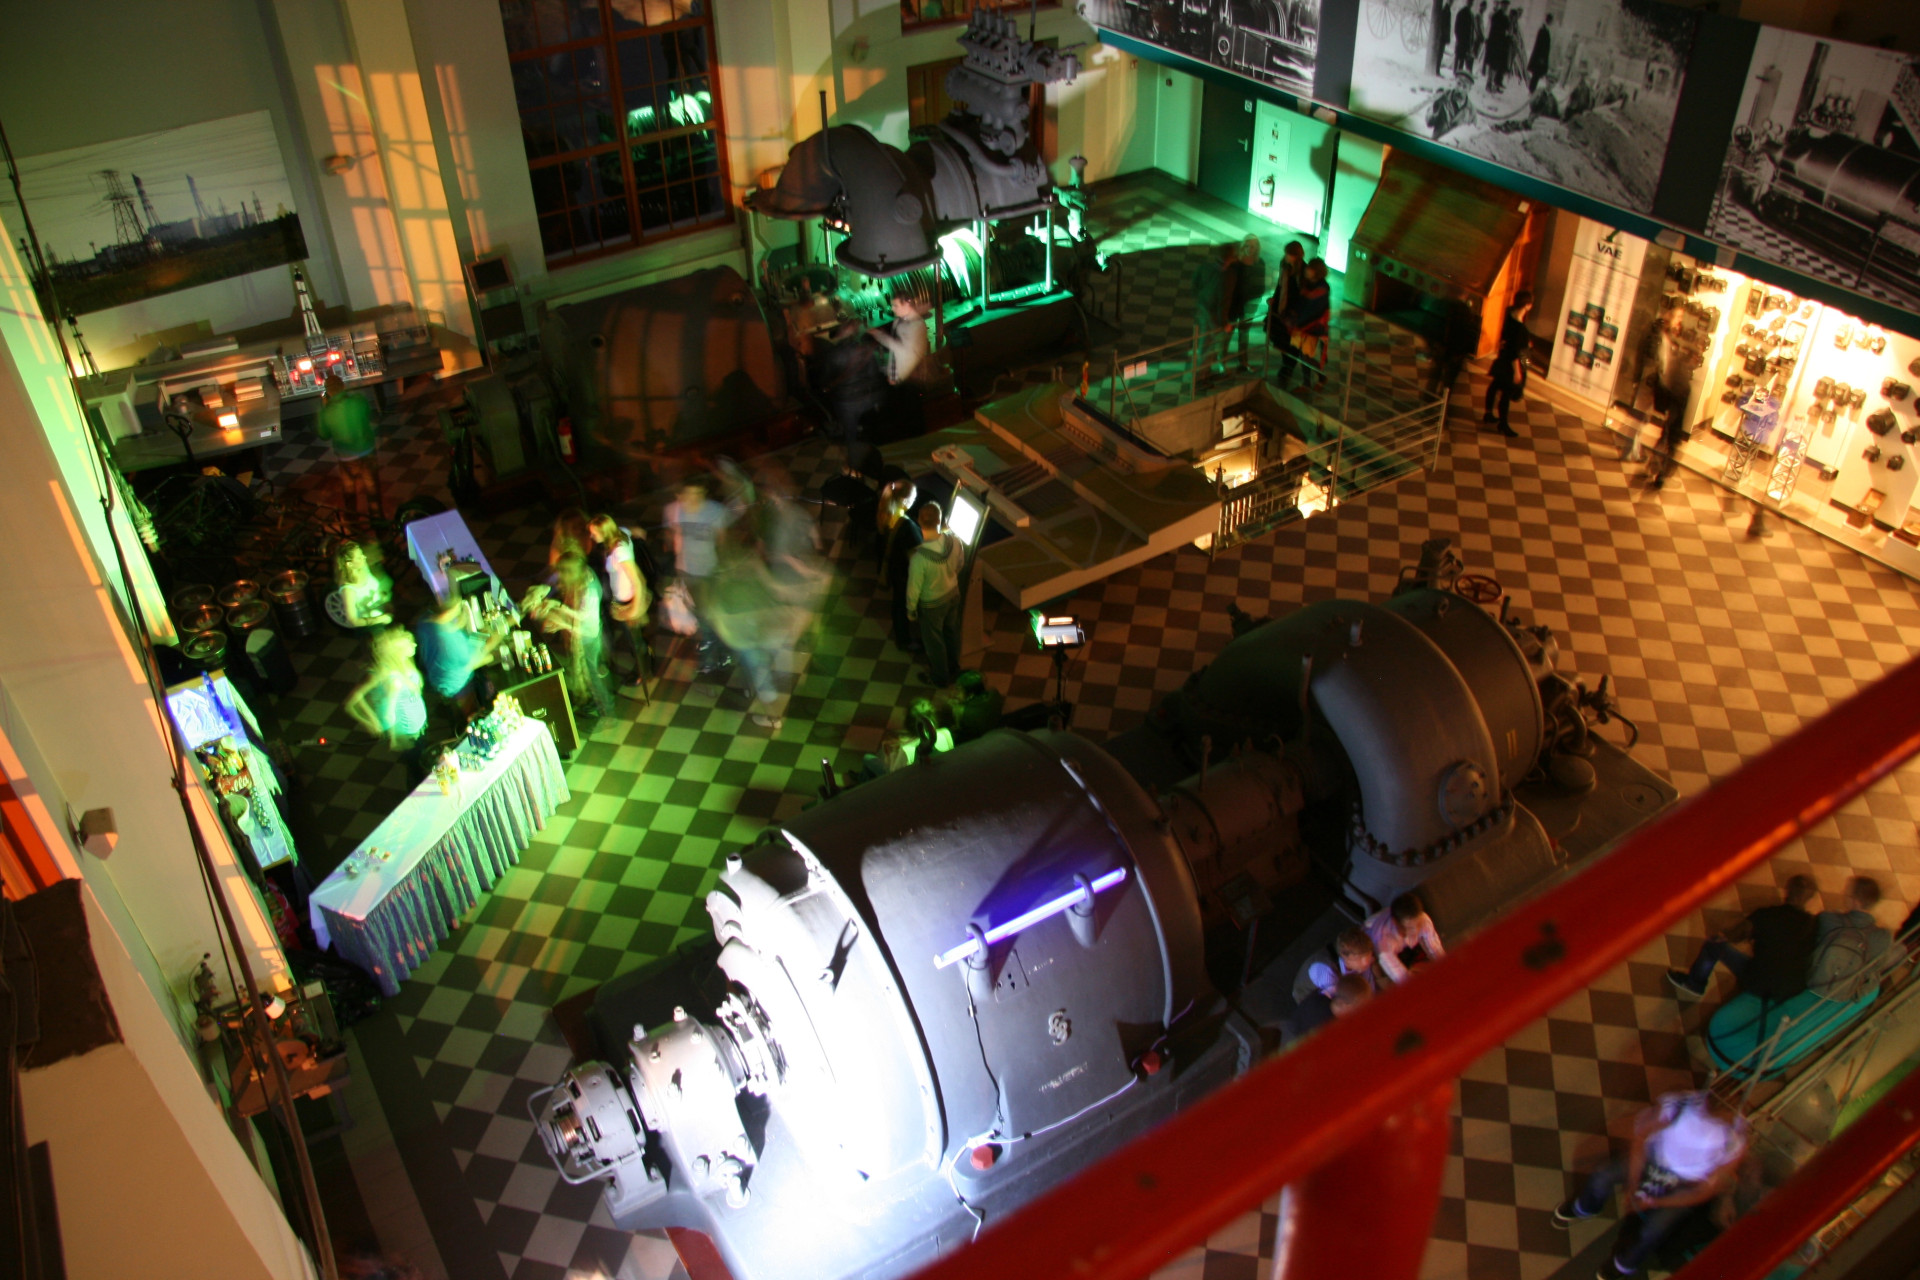 Energy and Technology museum | Vilnius | Event place - gallery picture